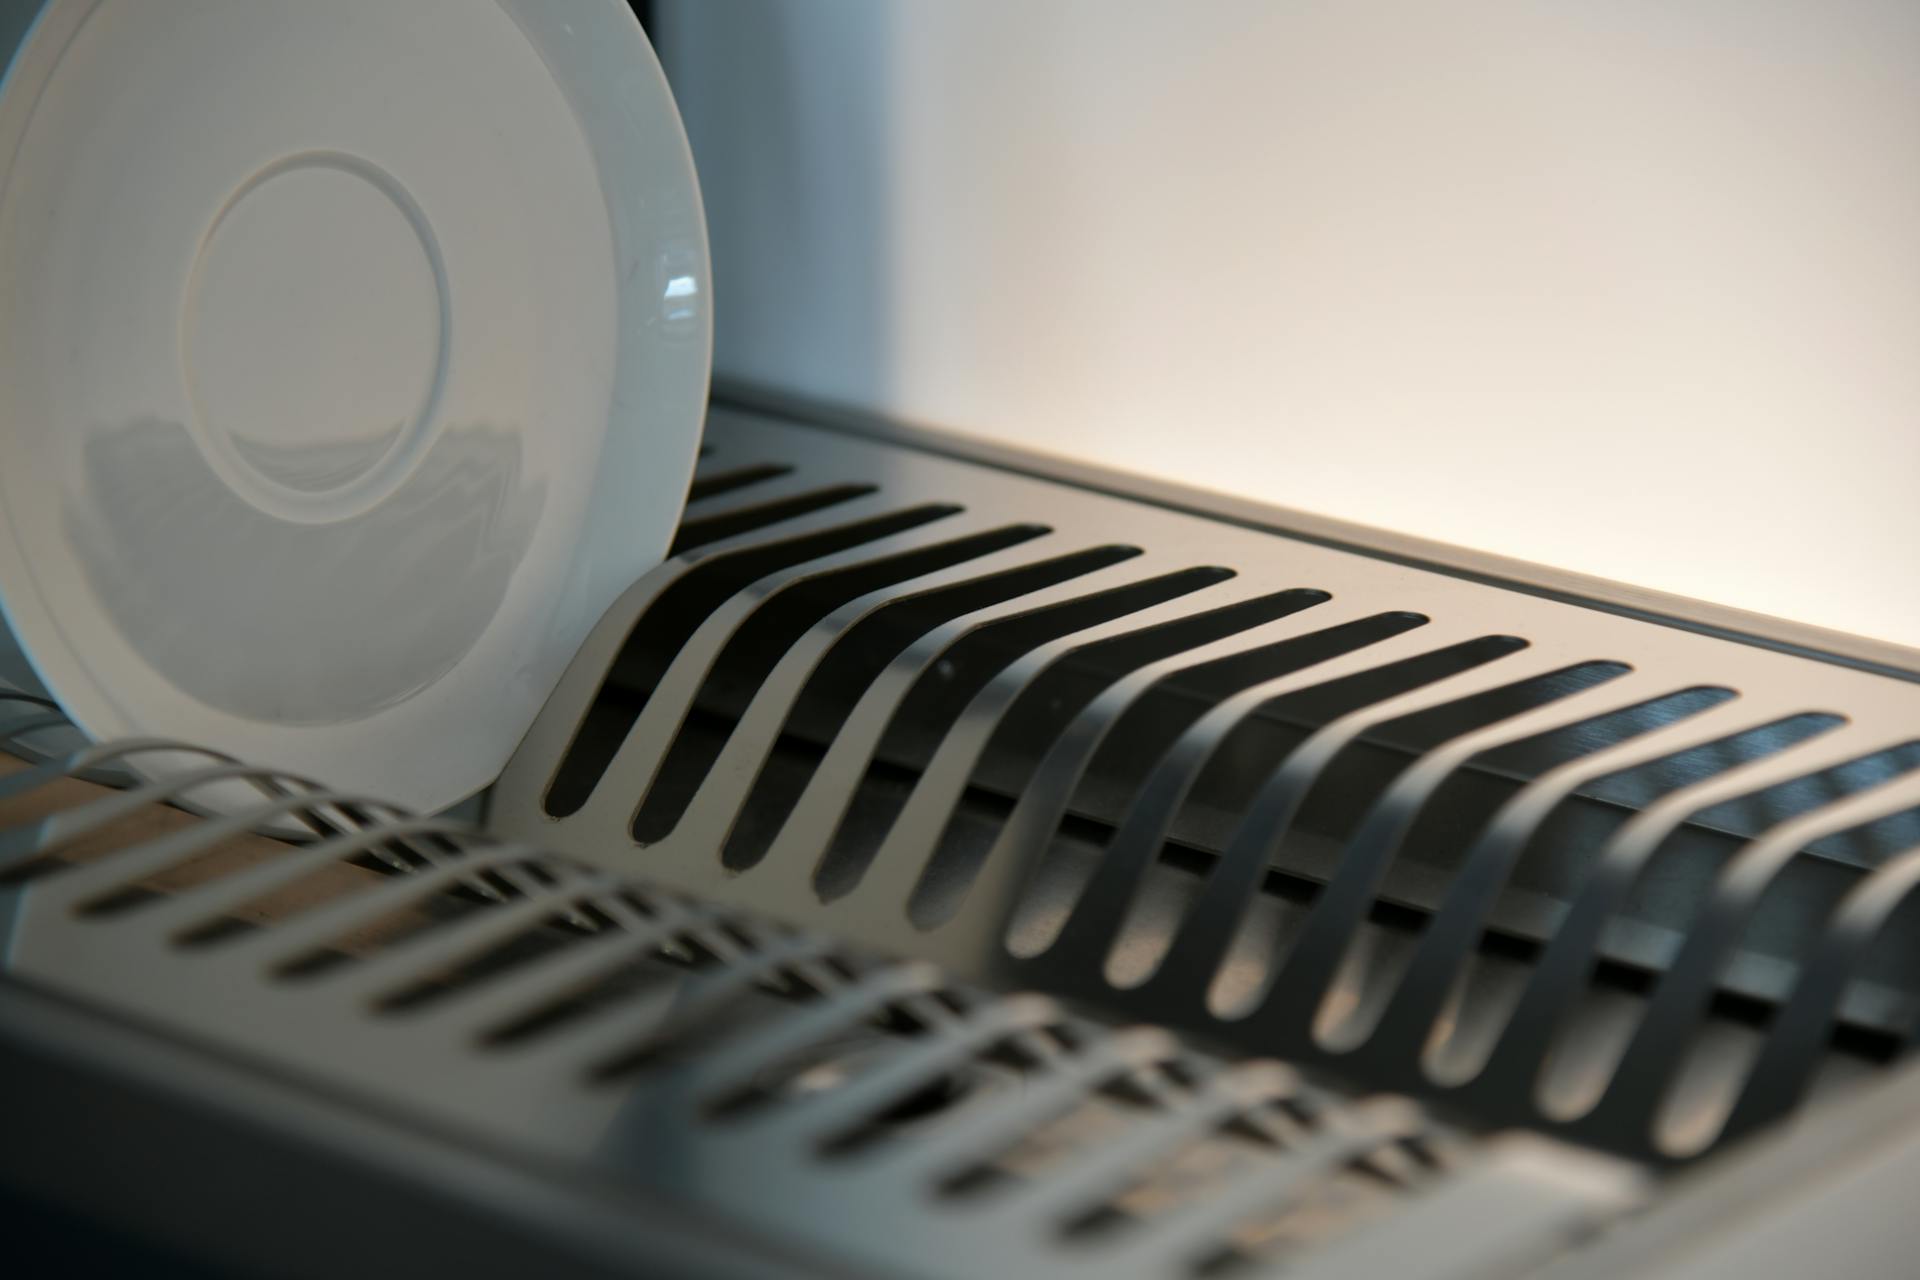 A plate in a drying rack | Source: Pexels